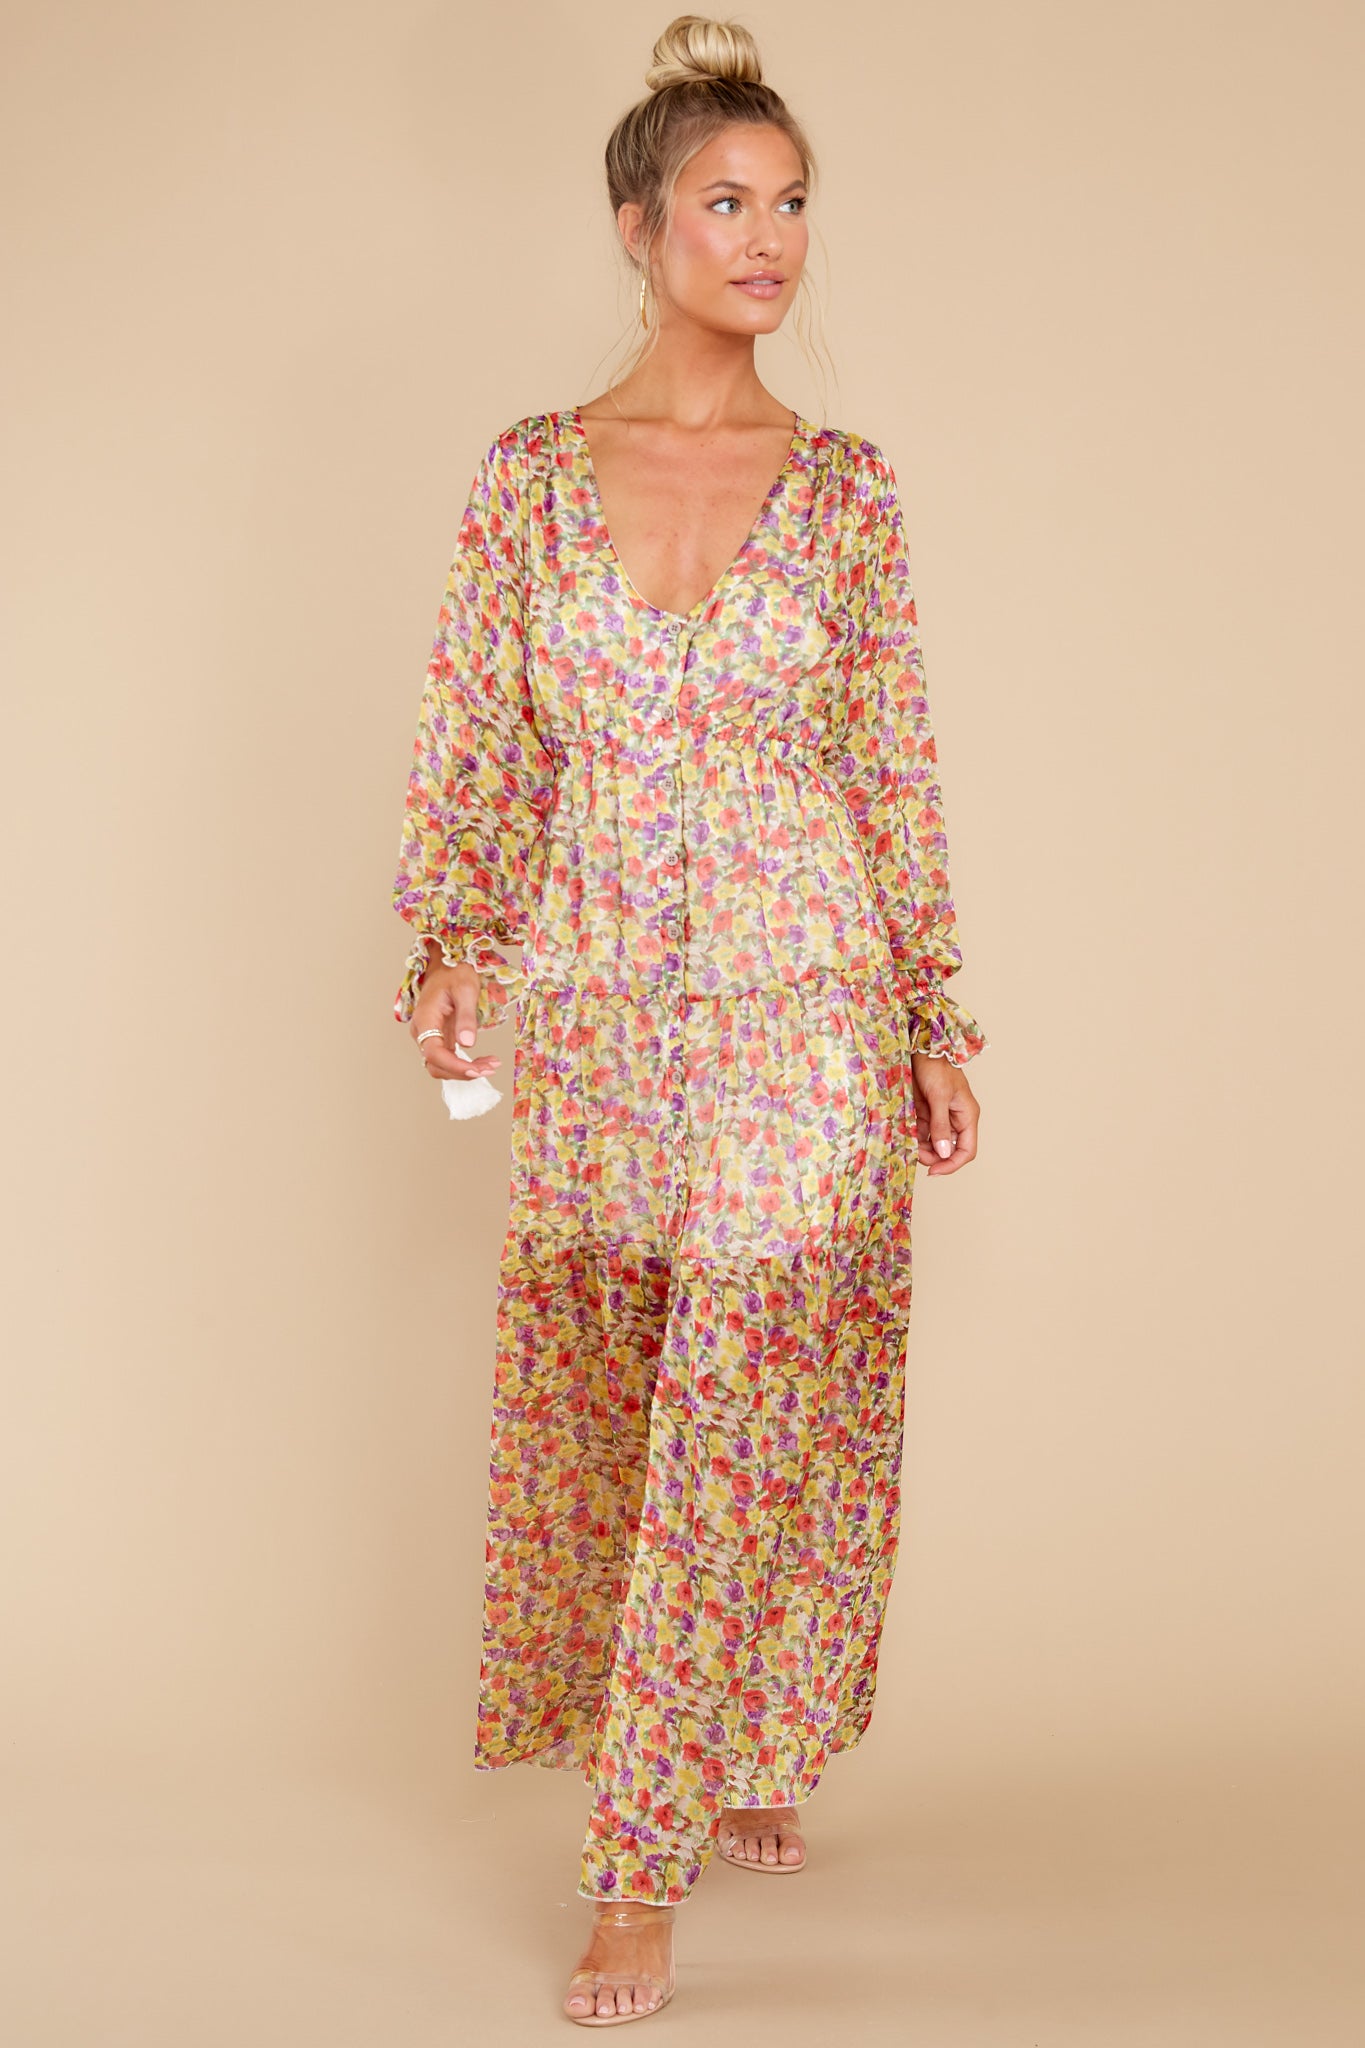 5 View From The Meadow Yellow Floral Print Maxi Dress at reddress.com